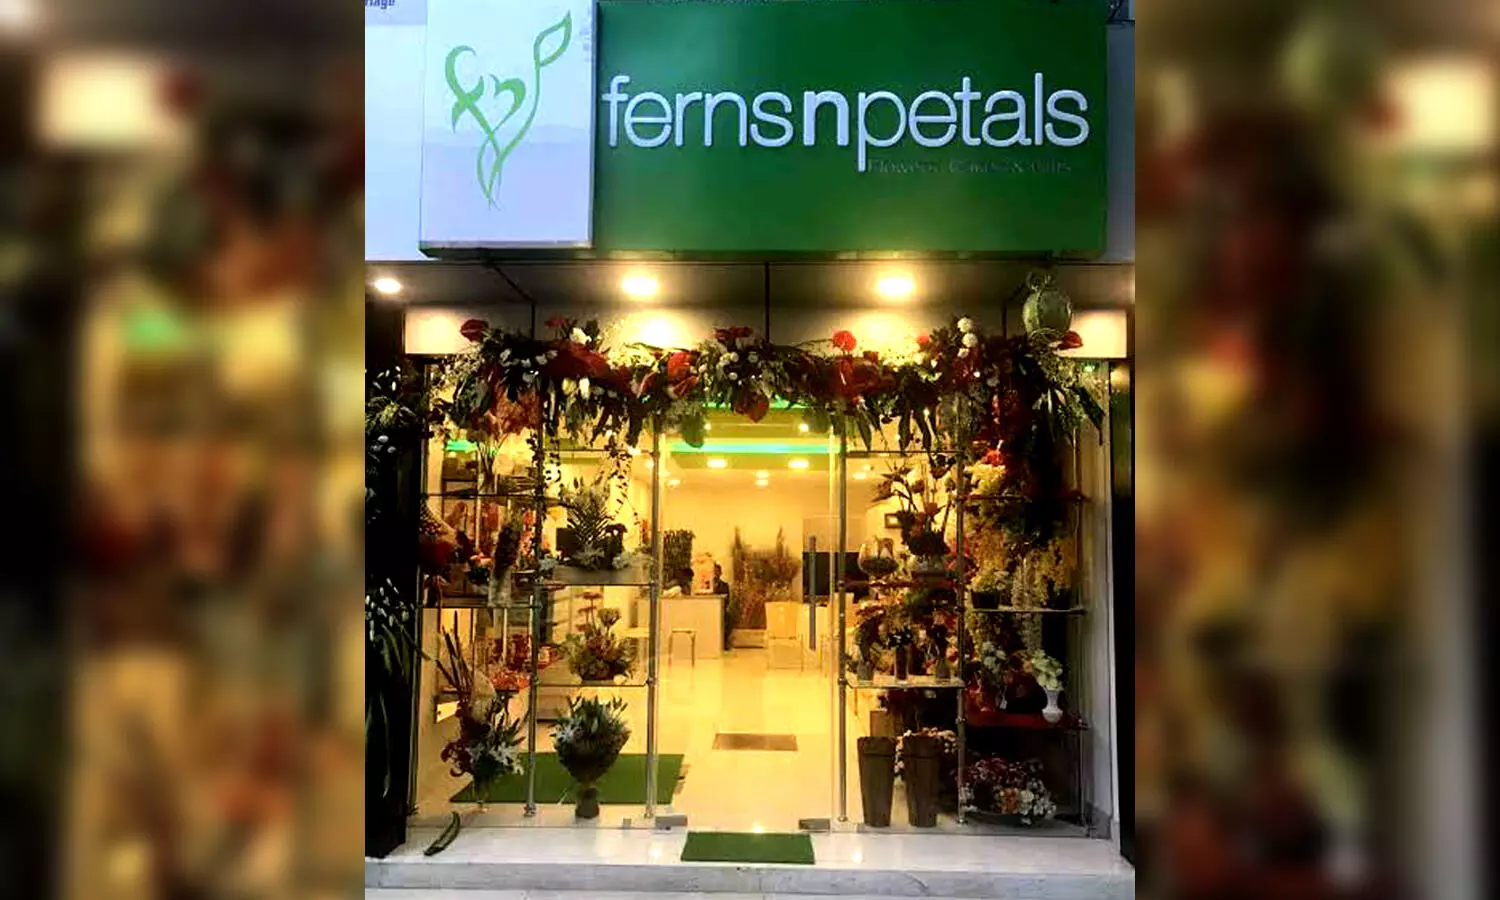 Ferns N Petals asked to pay Rs. 6,331 for late delivery of gift items in Hyderabad